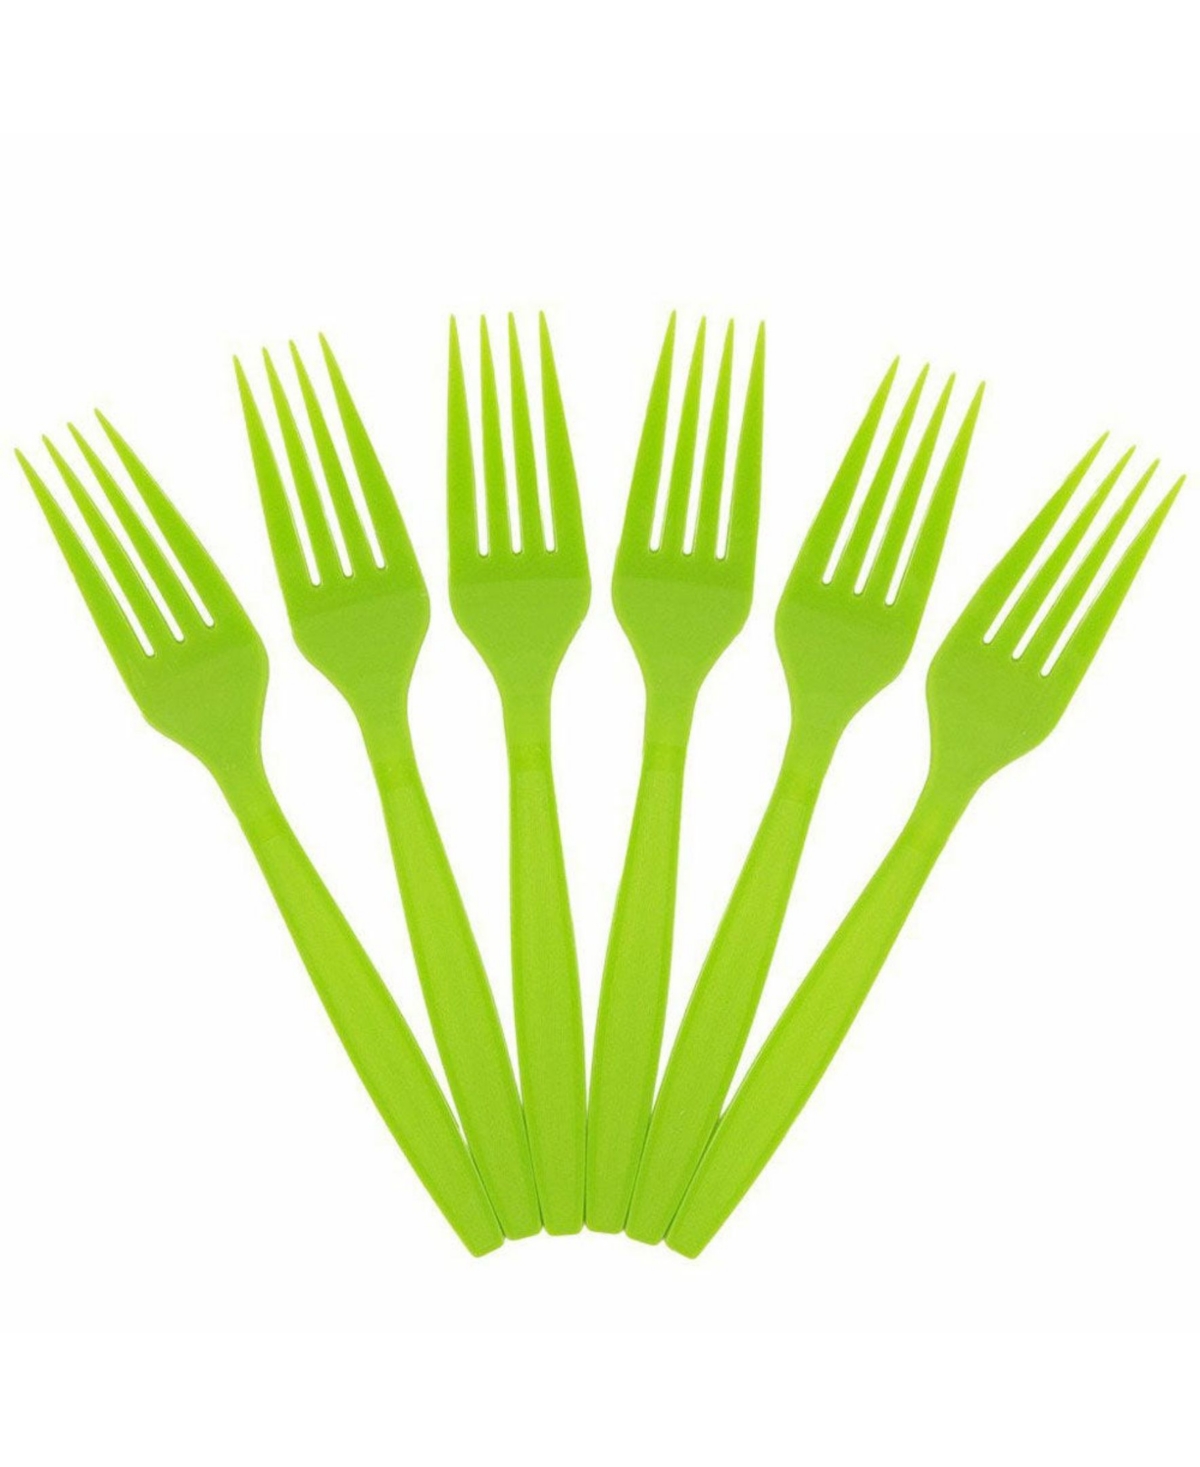 Jam Paper Big Party Pack Of Premium Plastic Forks In Lime Green